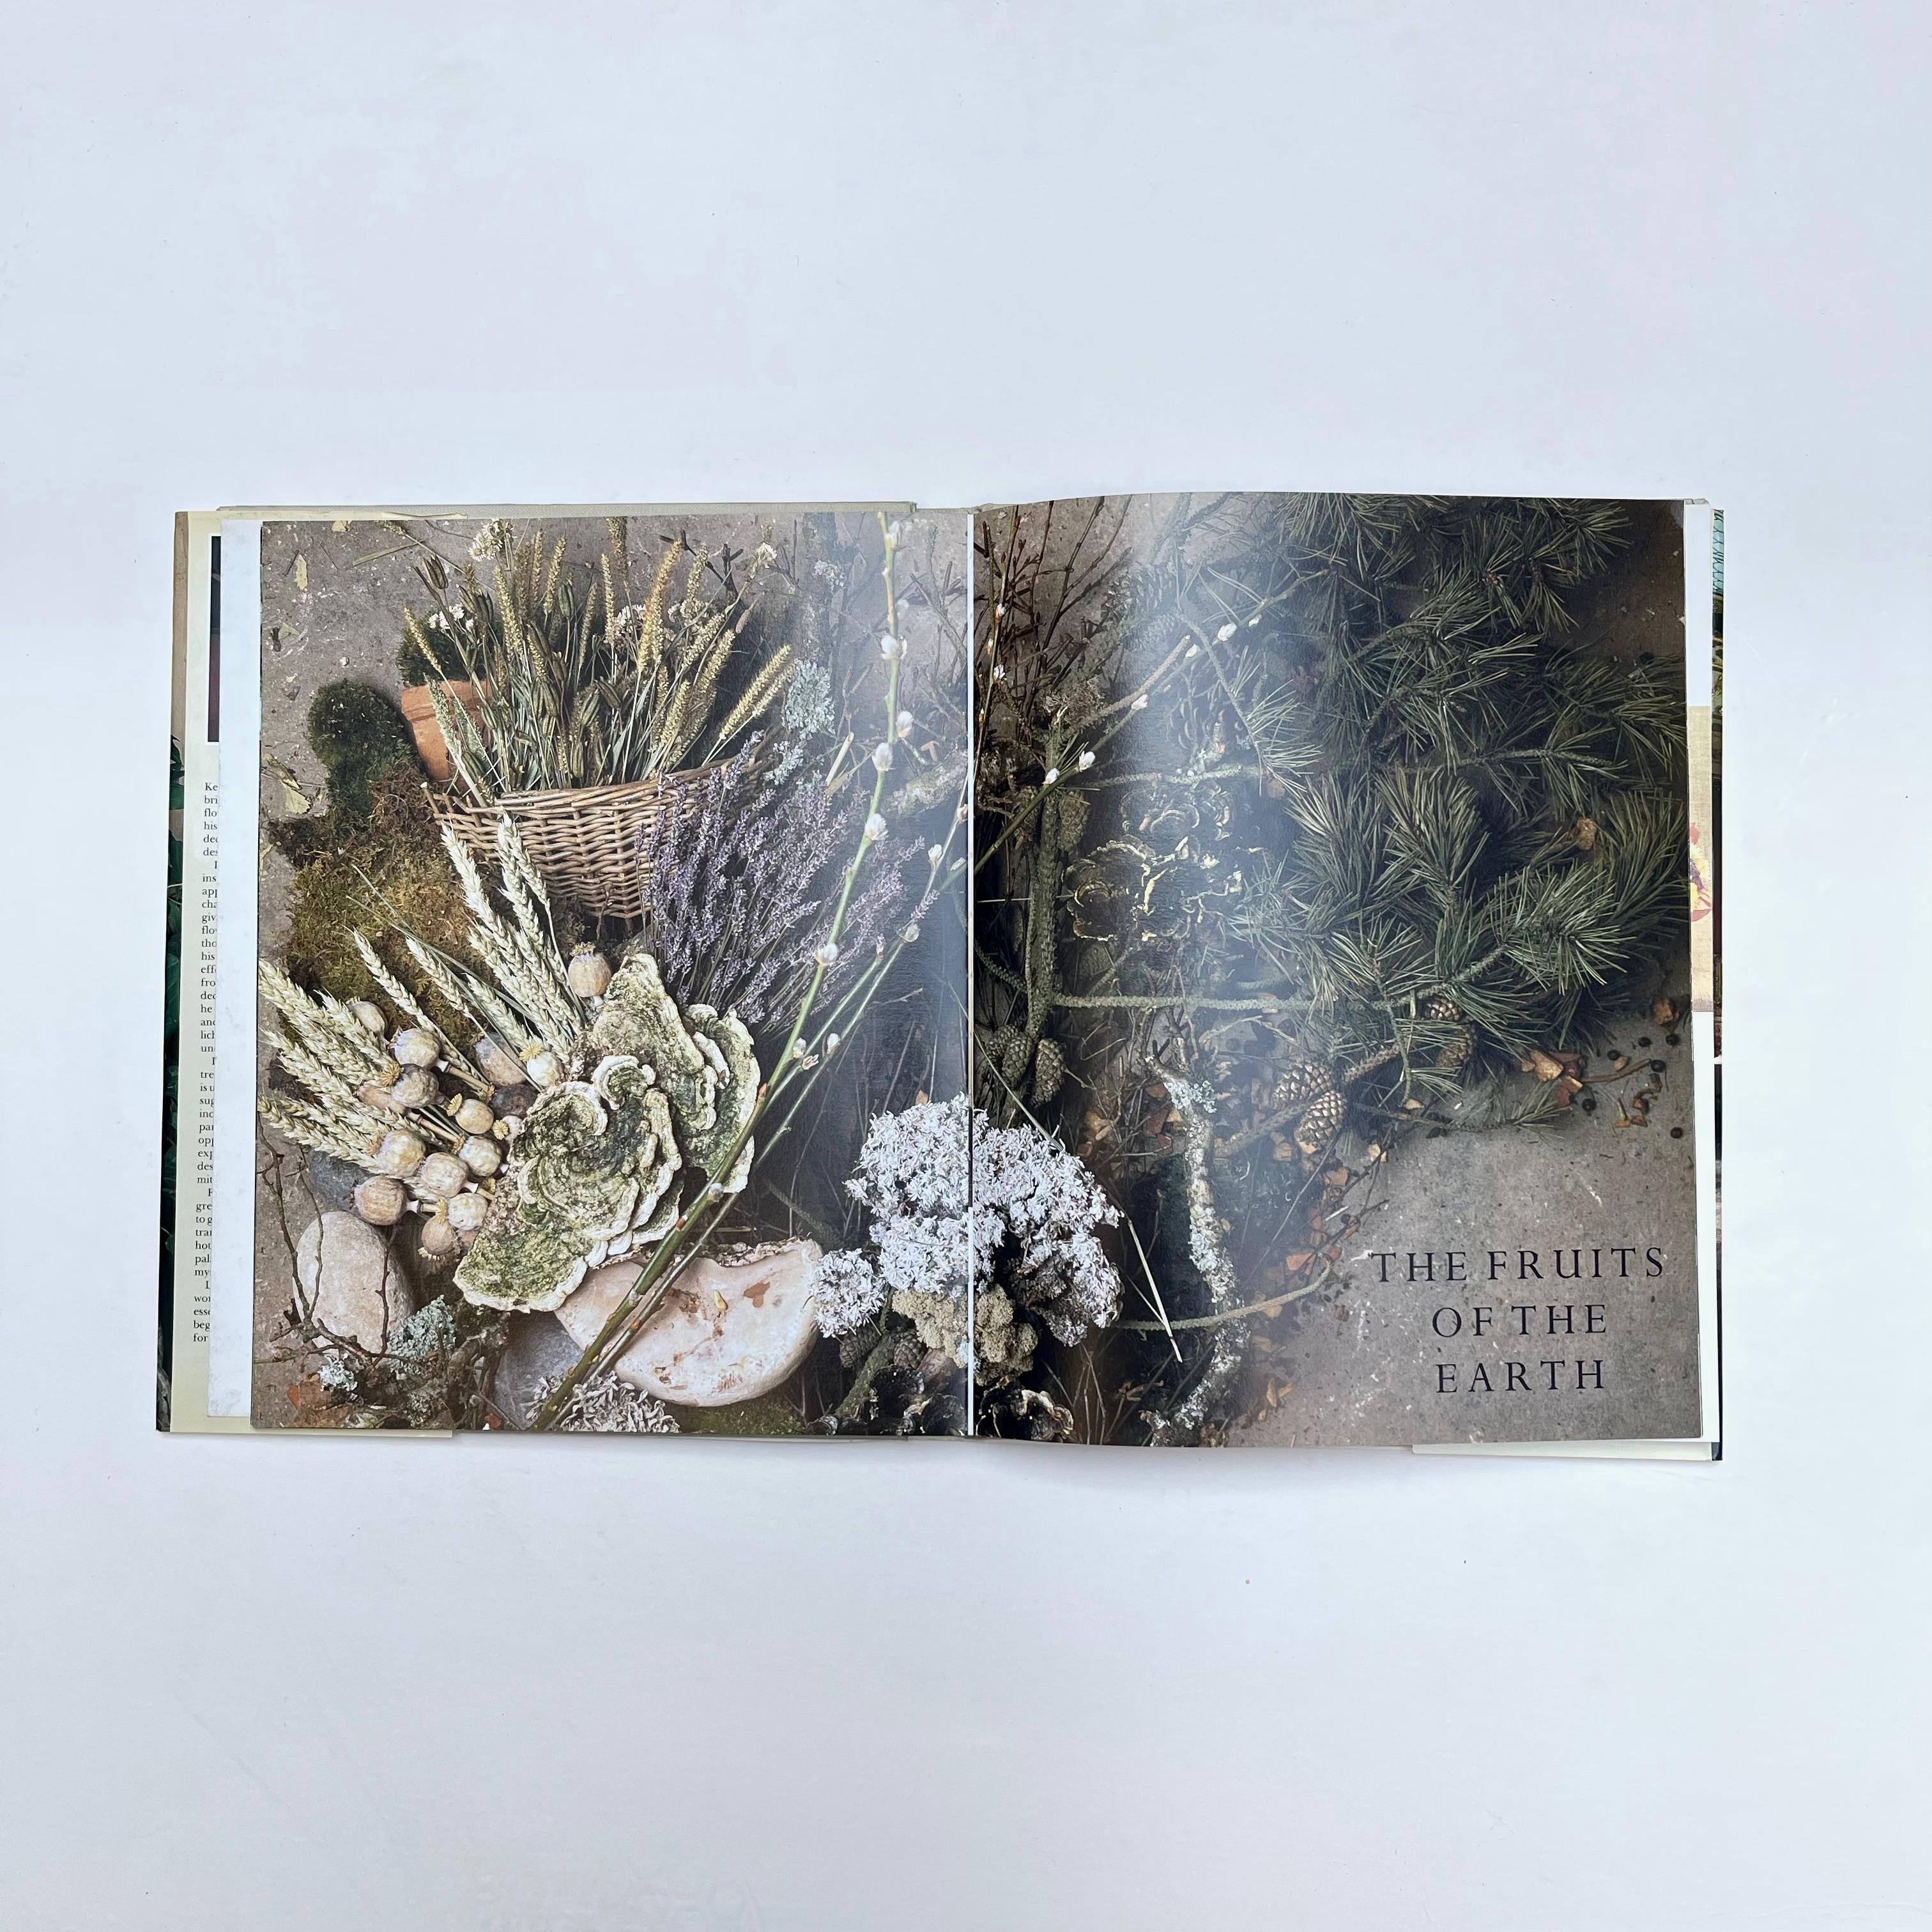 Flower style - The Art of Floral Design and Decoration - Kenneth Turner
Published by Weidenfeld &Nicolson Ltd, London 1989. Hardback first edition in dust jacket. 

Illustrated throughout in colour. Kenneth Turner is an internationally acclaimed